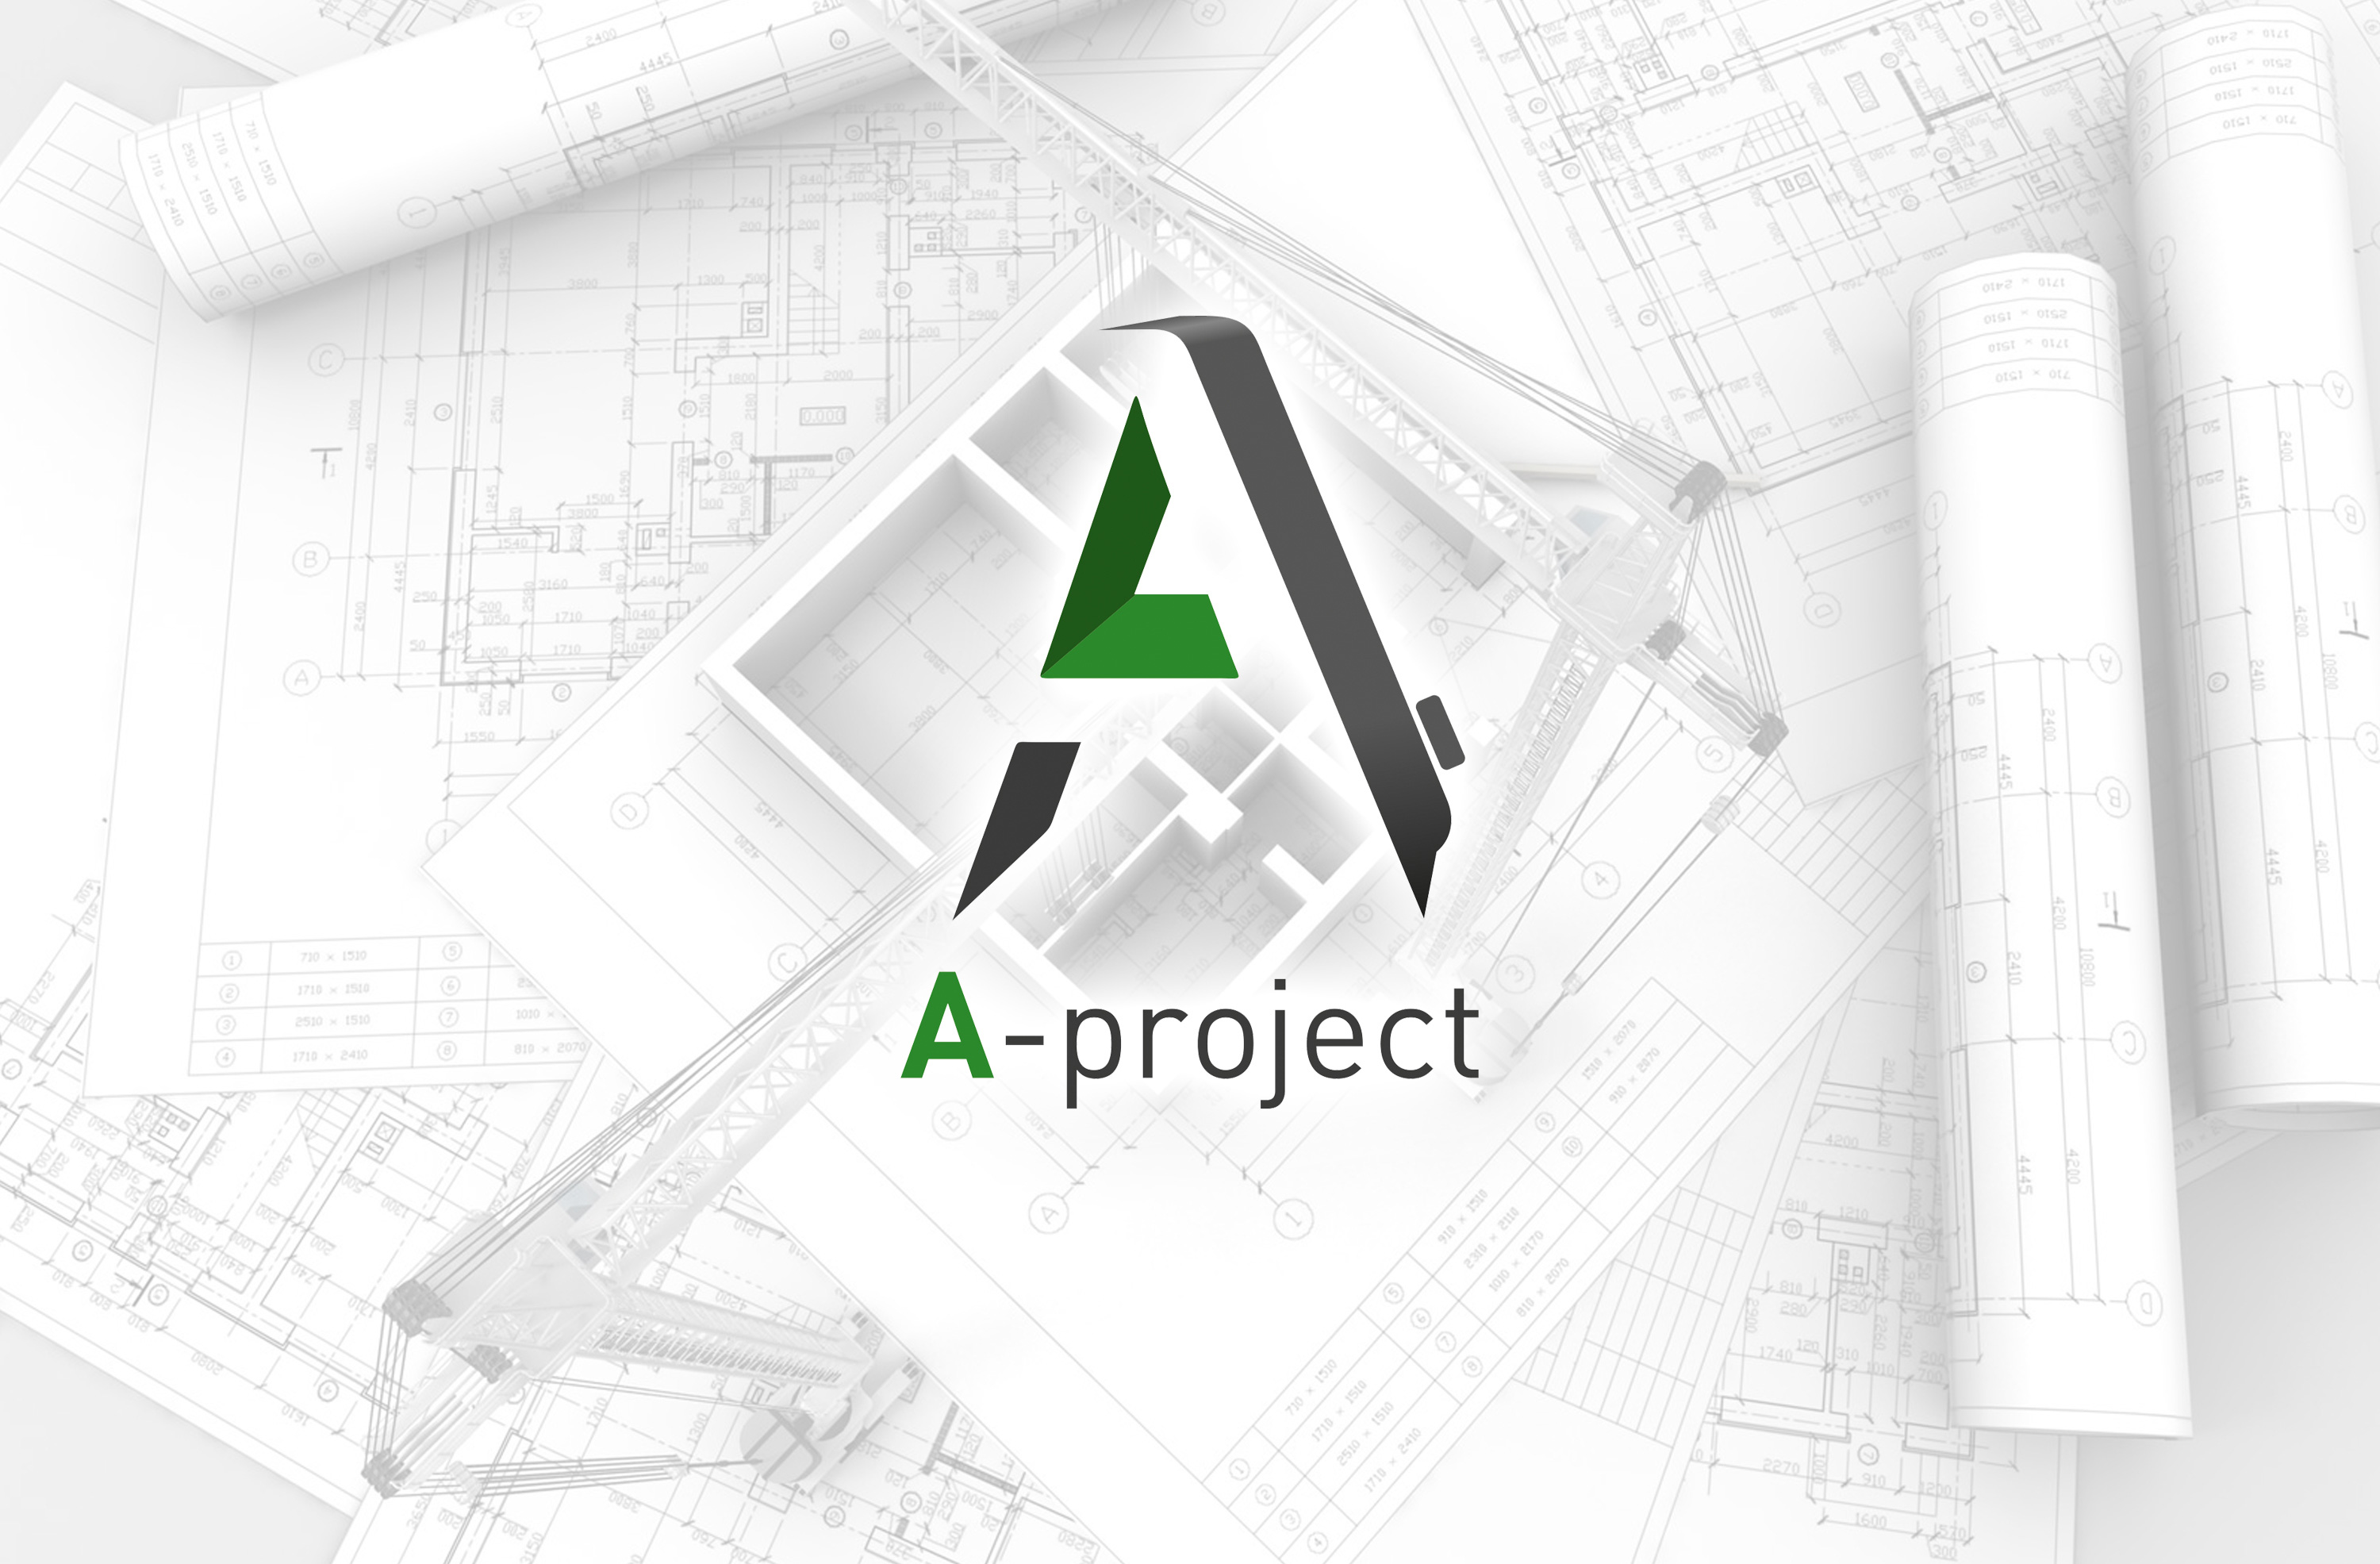 A-project